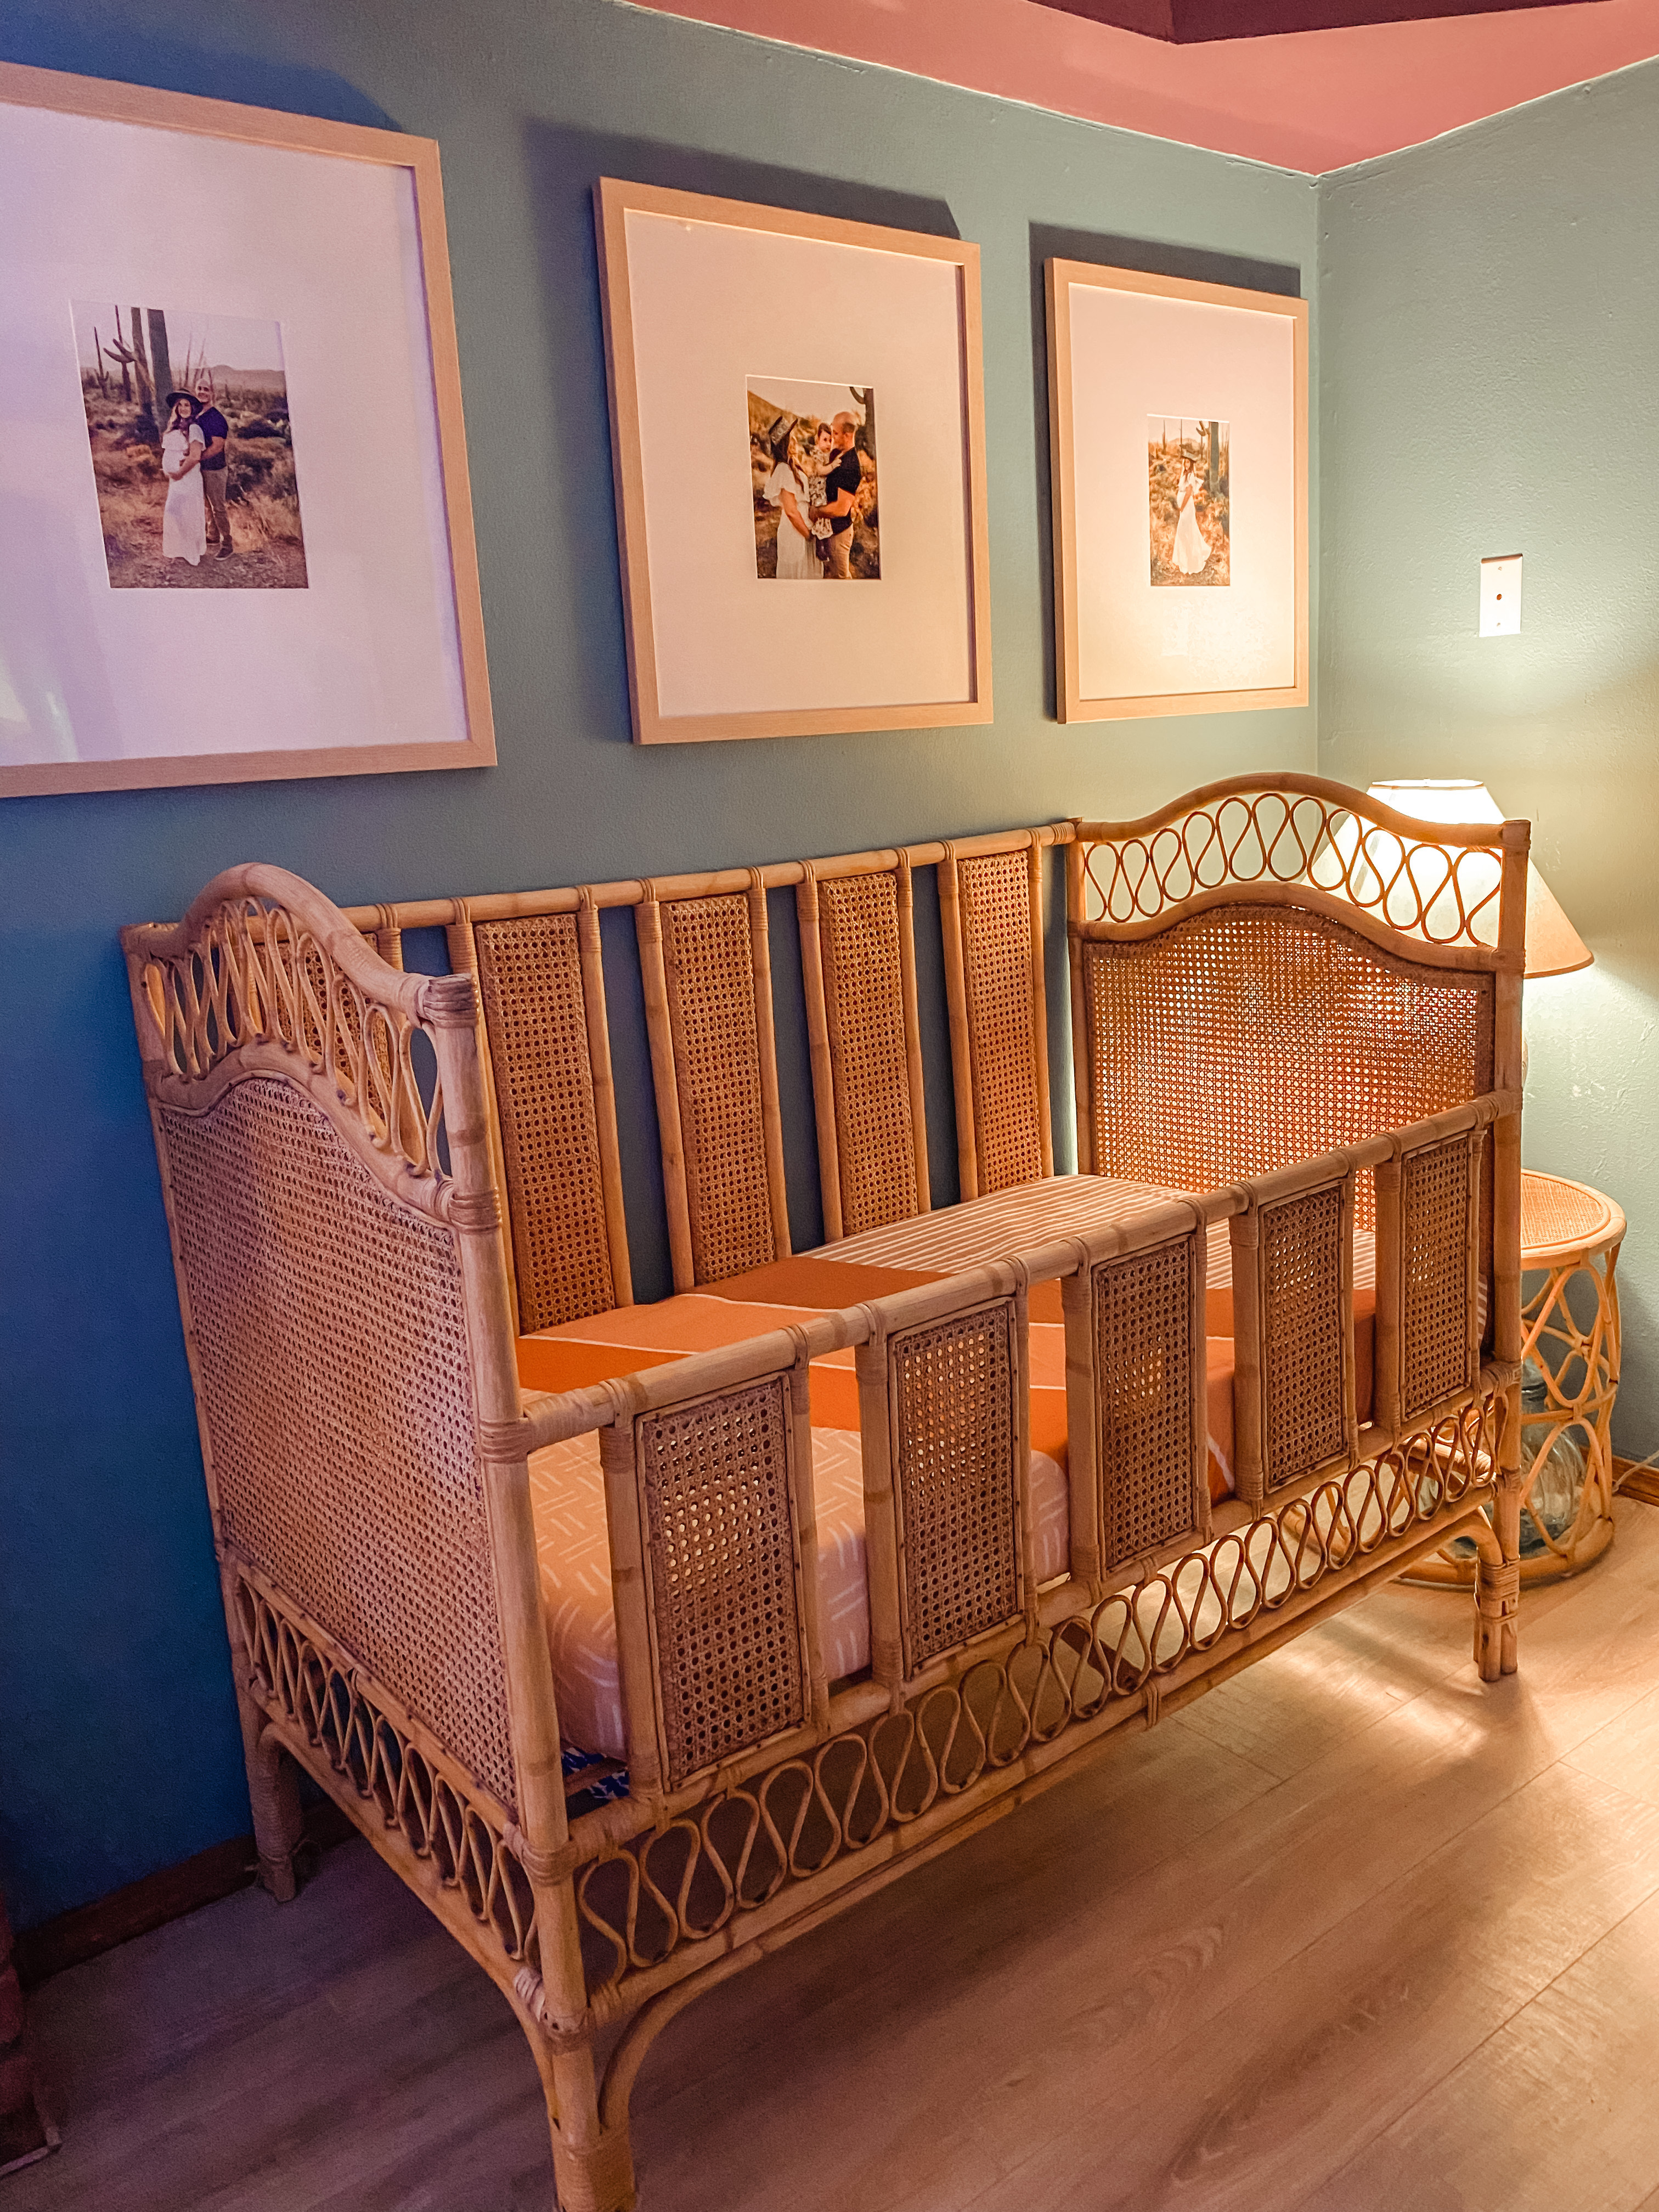 Tips For Decorating Your Nursery: a warm colored crib and nursery